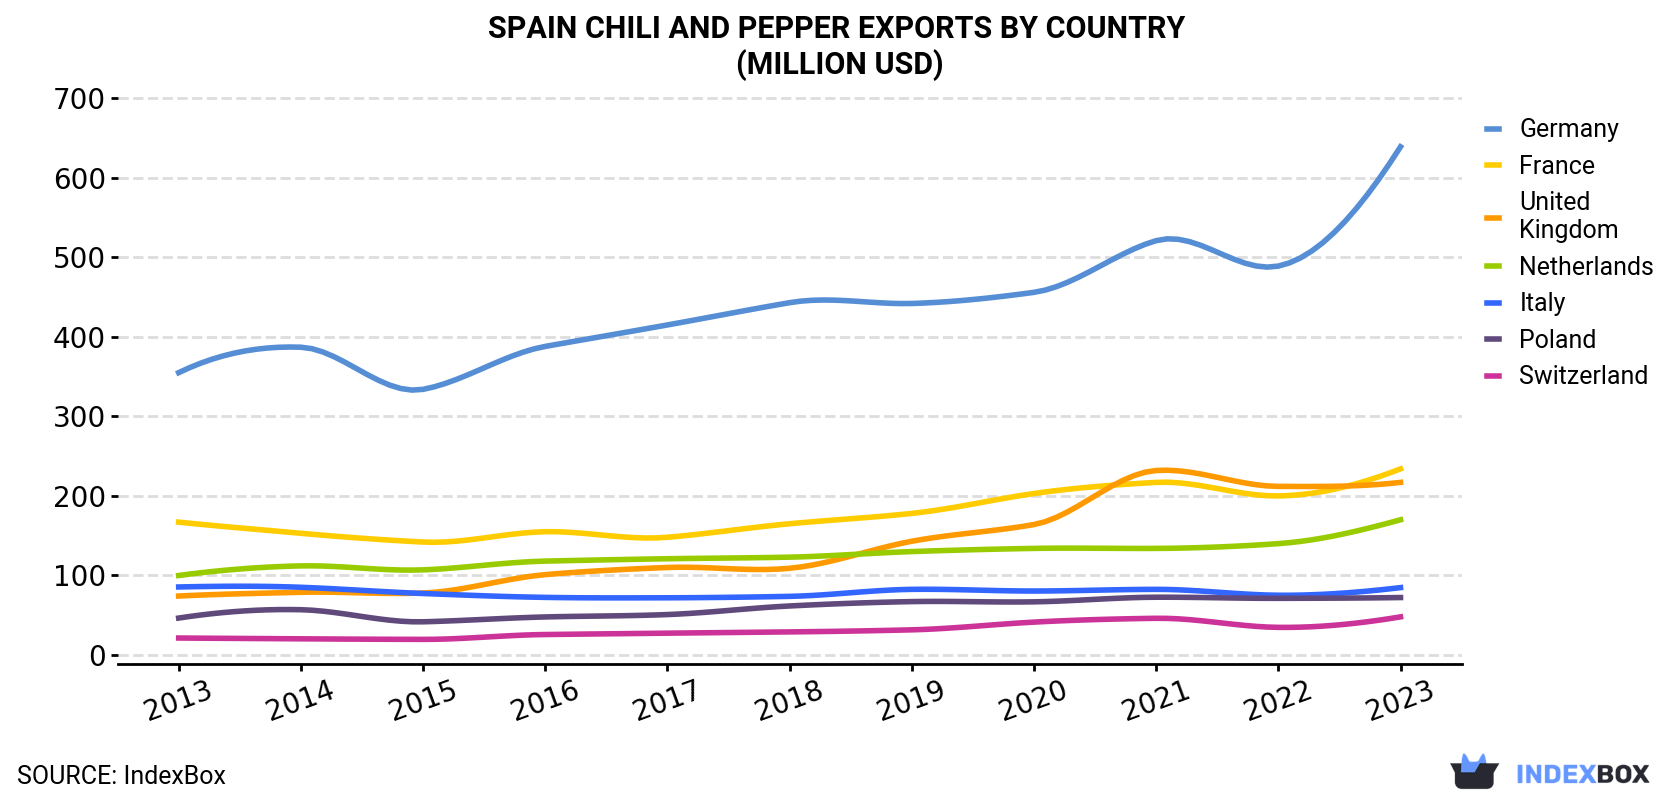 Spain Chili And Pepper Exports By Country (Million USD)